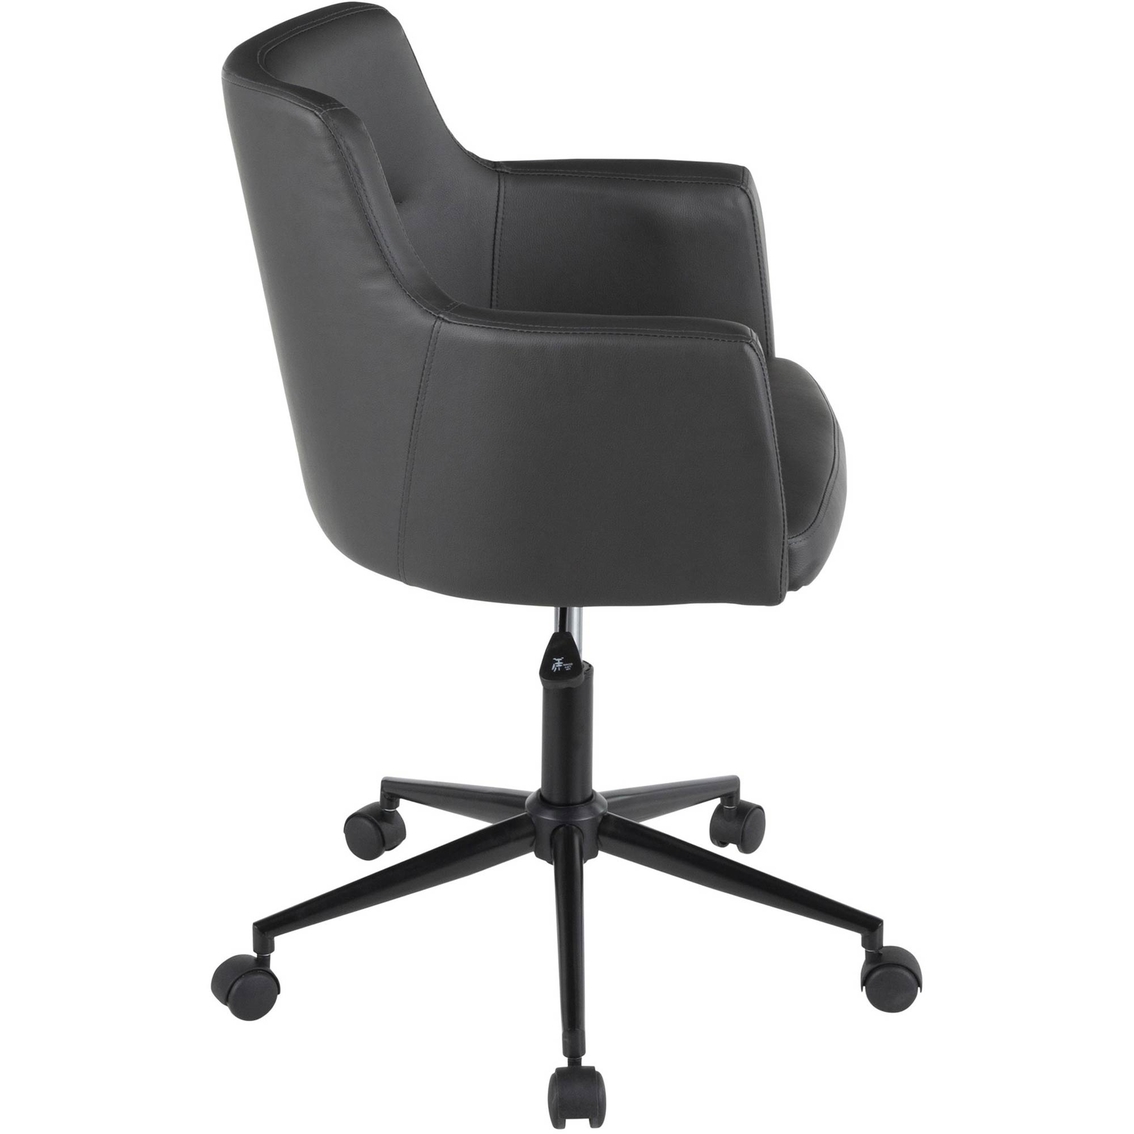 LumiSource Andrew Office Chair - Image 5 of 6